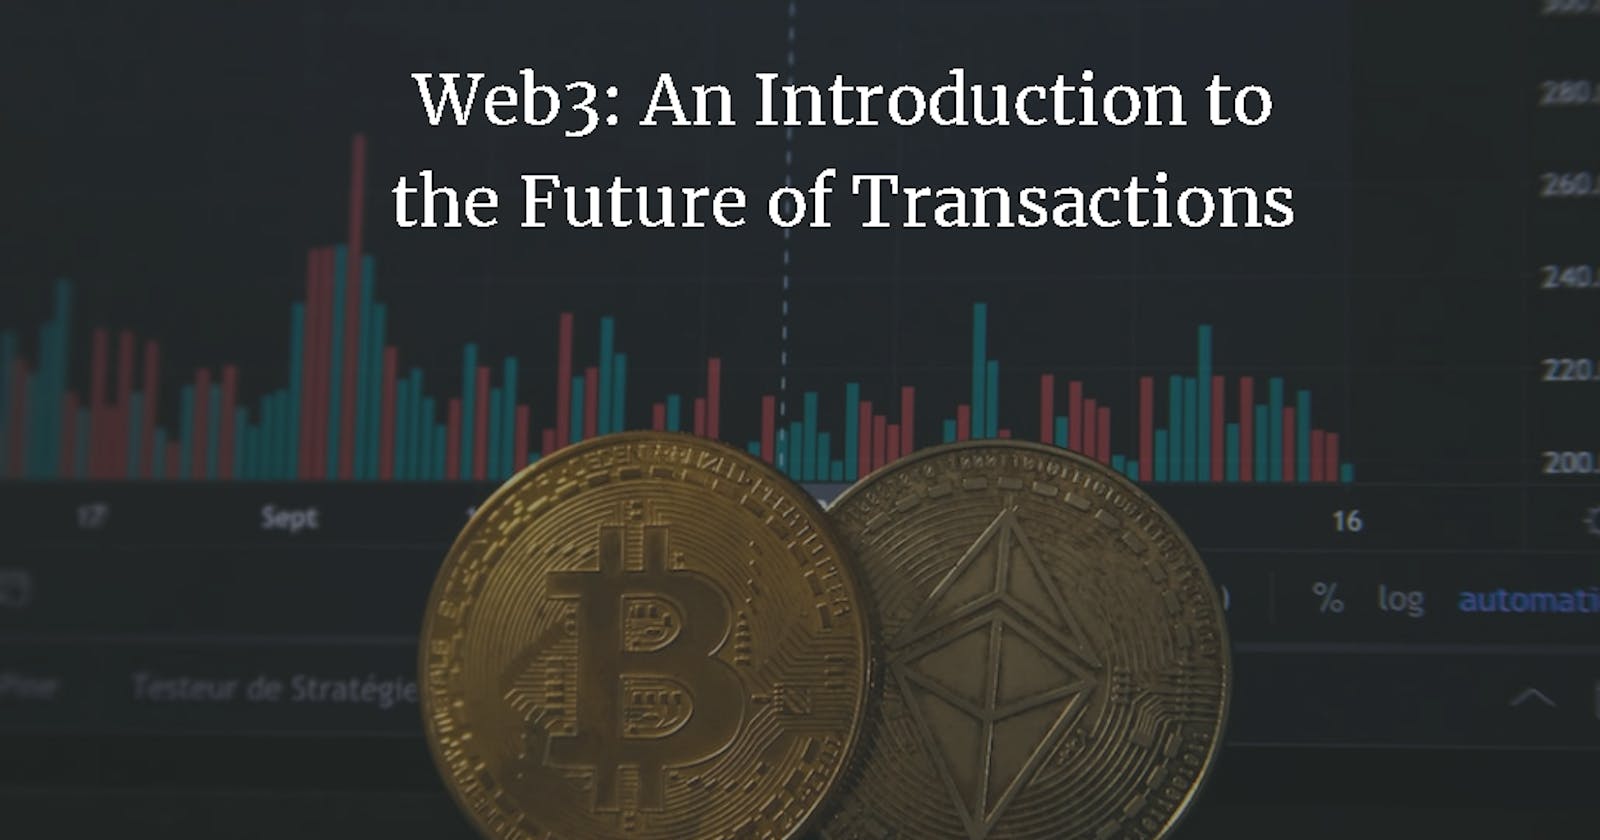 Web3: An Introduction to the Future of Transactions